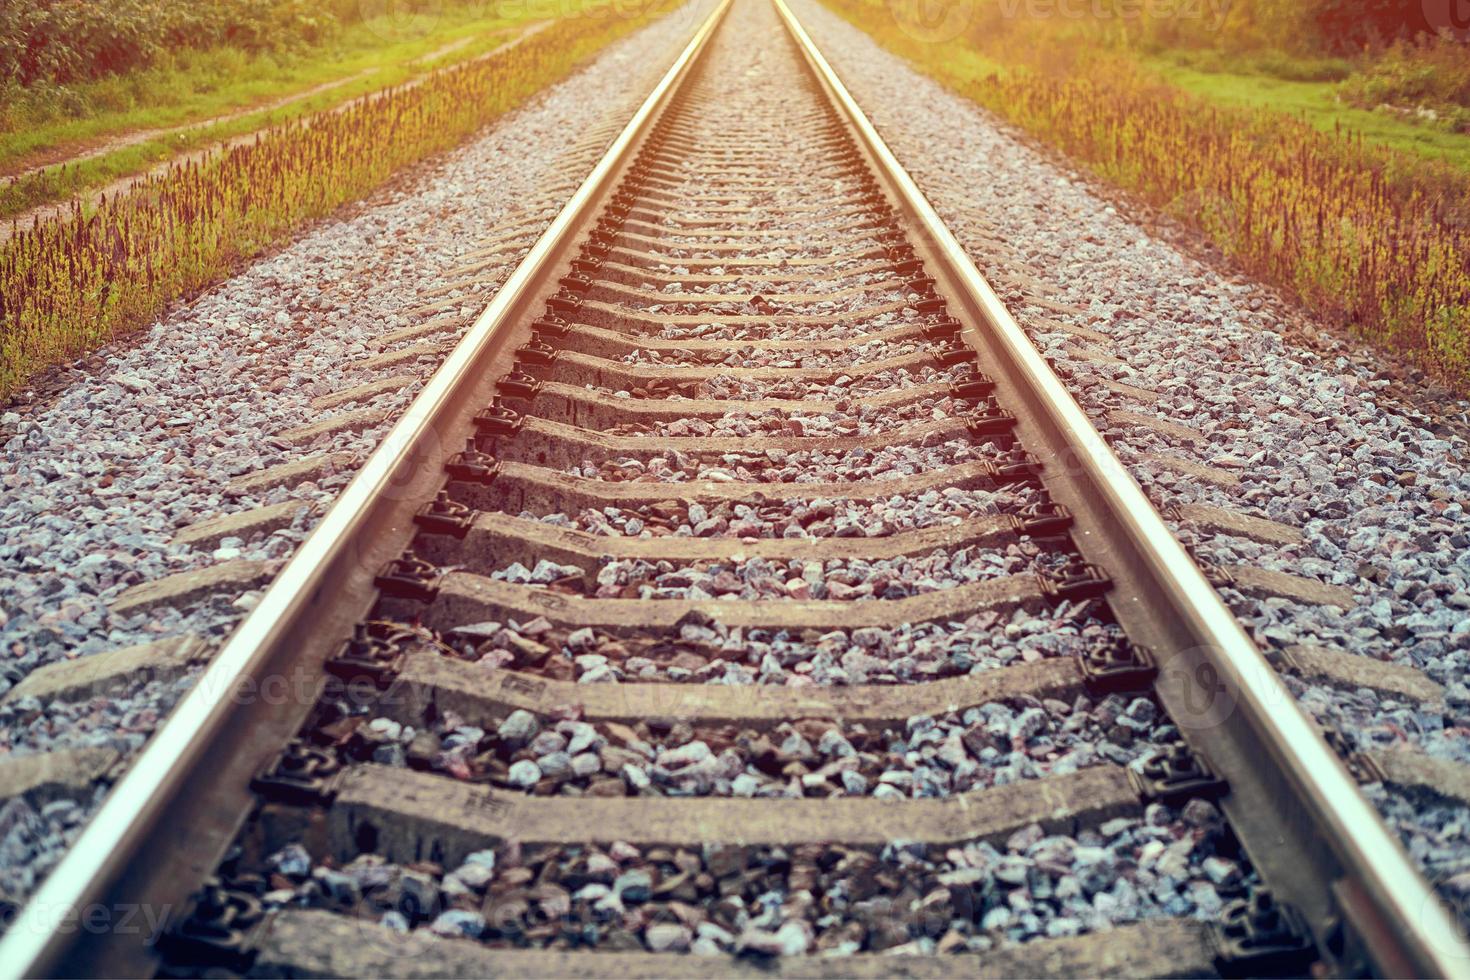 Railway track line in sunlight, railroad train track landscape with ballast gravel and crushed stone photo